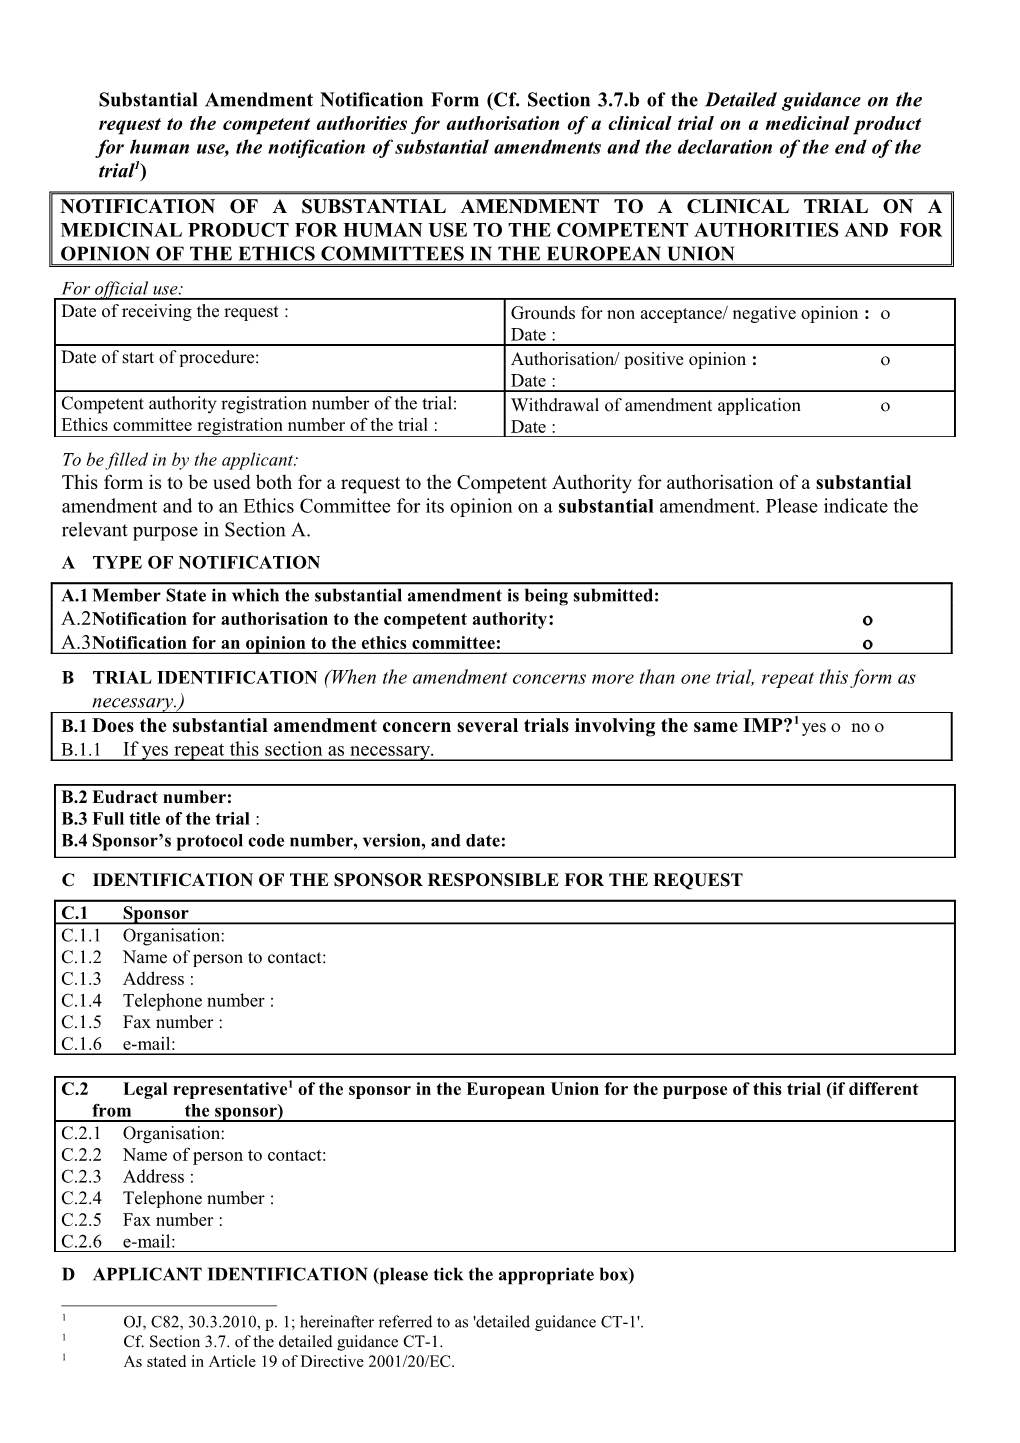 Substantial Amendment Notification Form (Cf. Section 3.7.B of the Detailed Guidance On